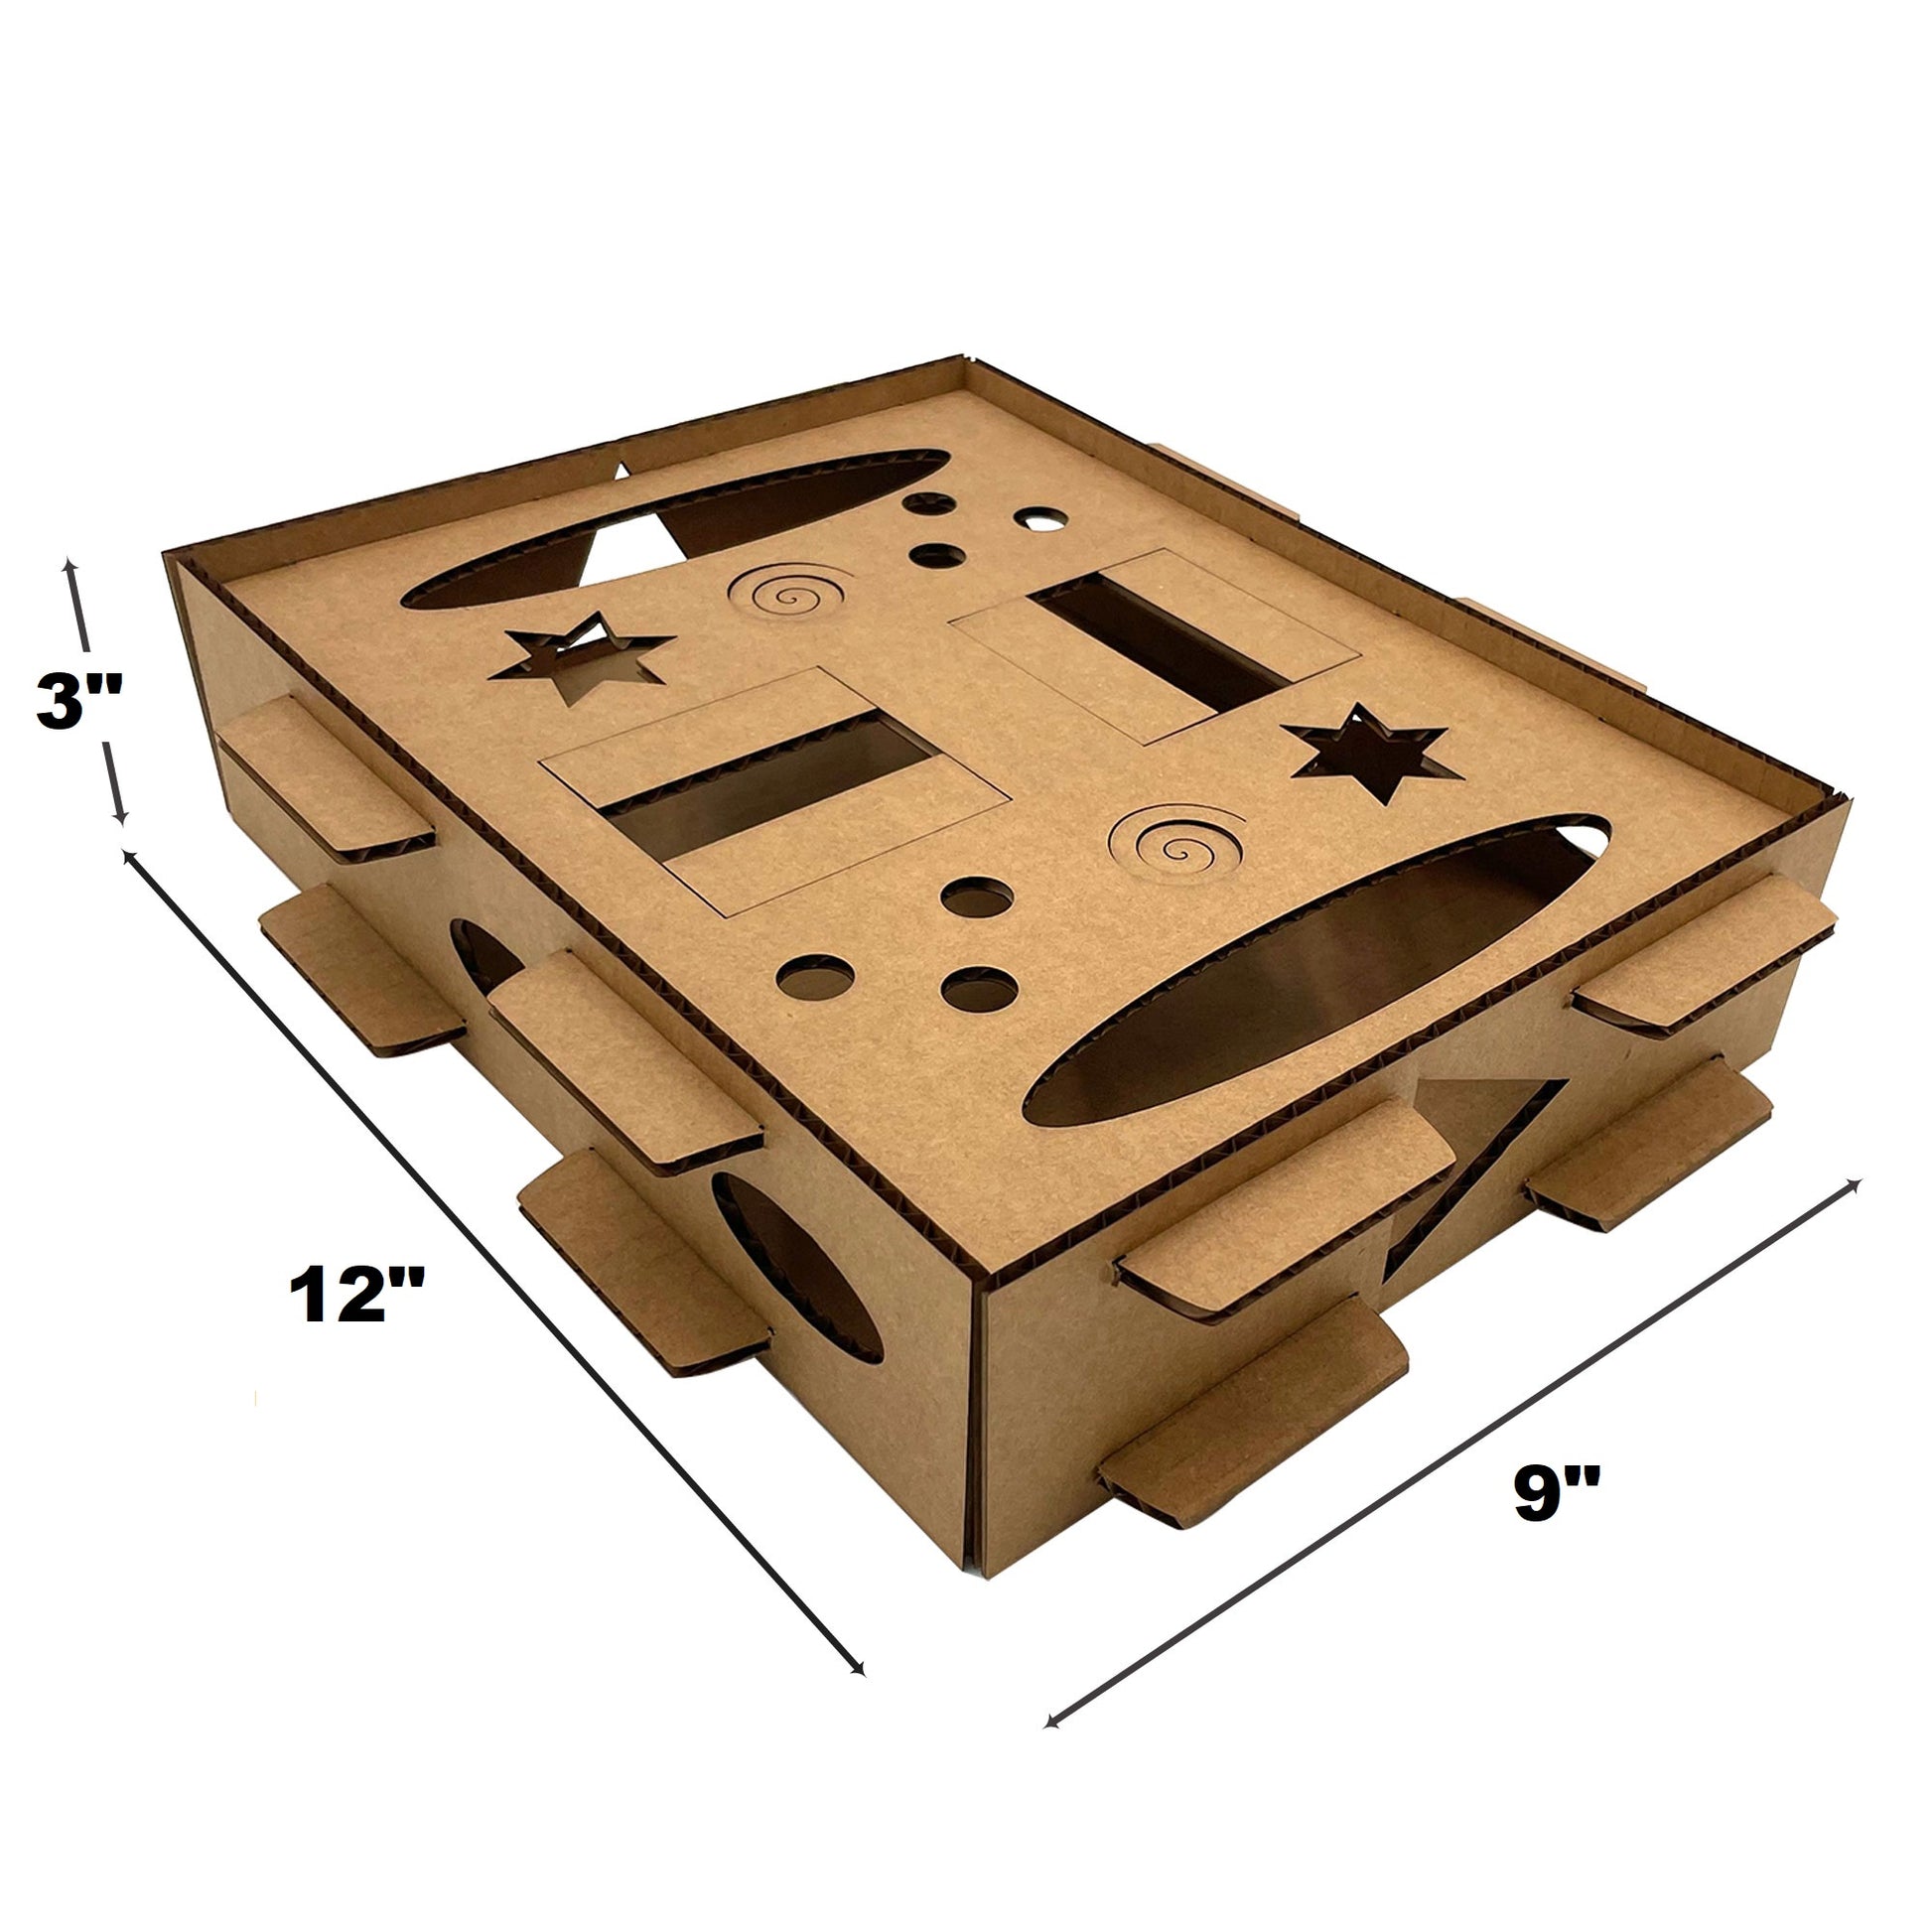 DIY Puzzle Feeders Help Bring Out TheTrue Nature of Cats - The